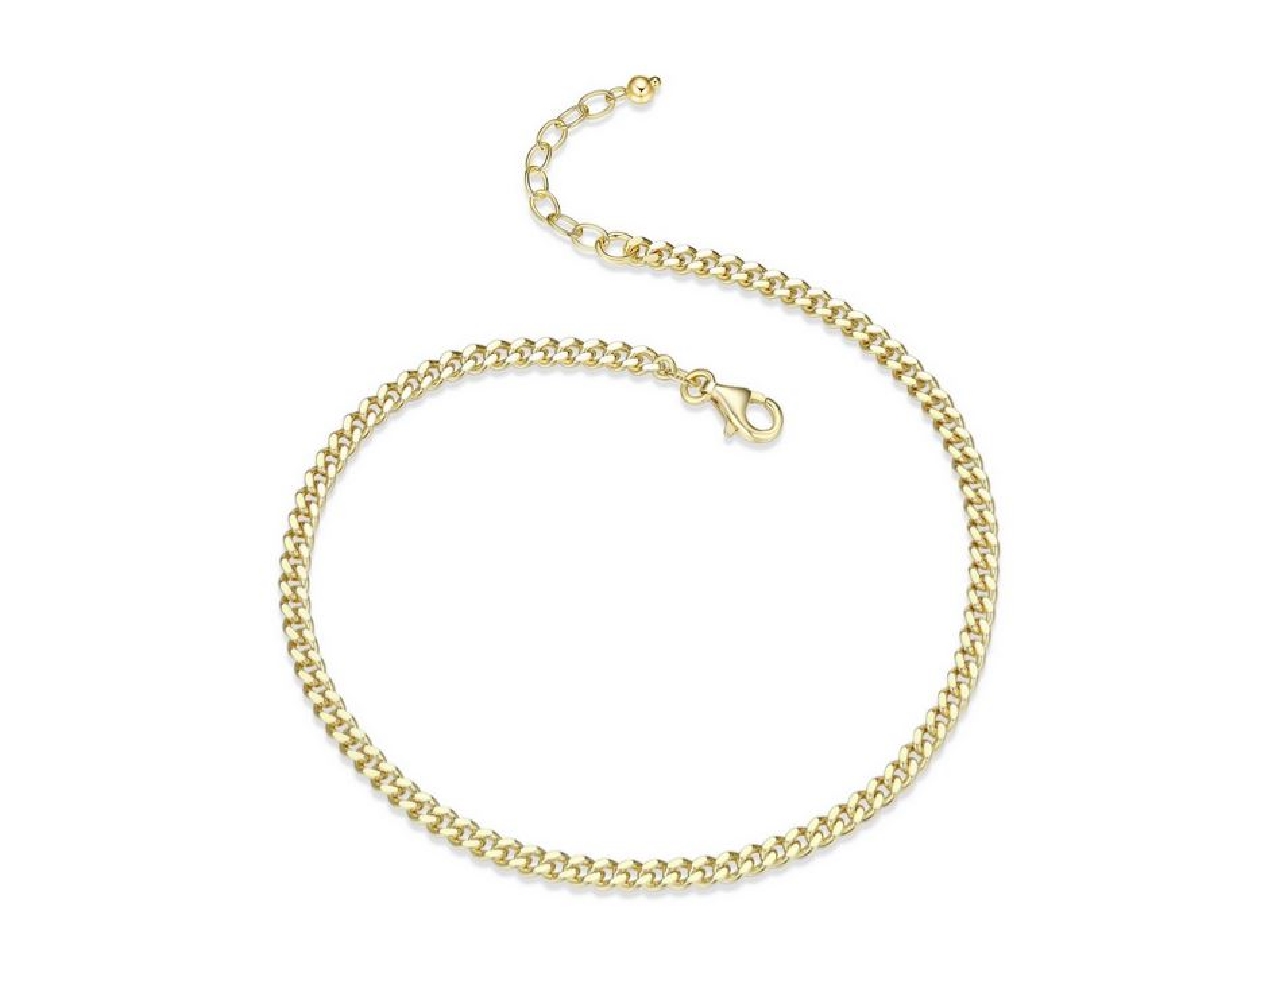 Reign 
Cowboy Chain Anklet
Silver/Gold Plated...